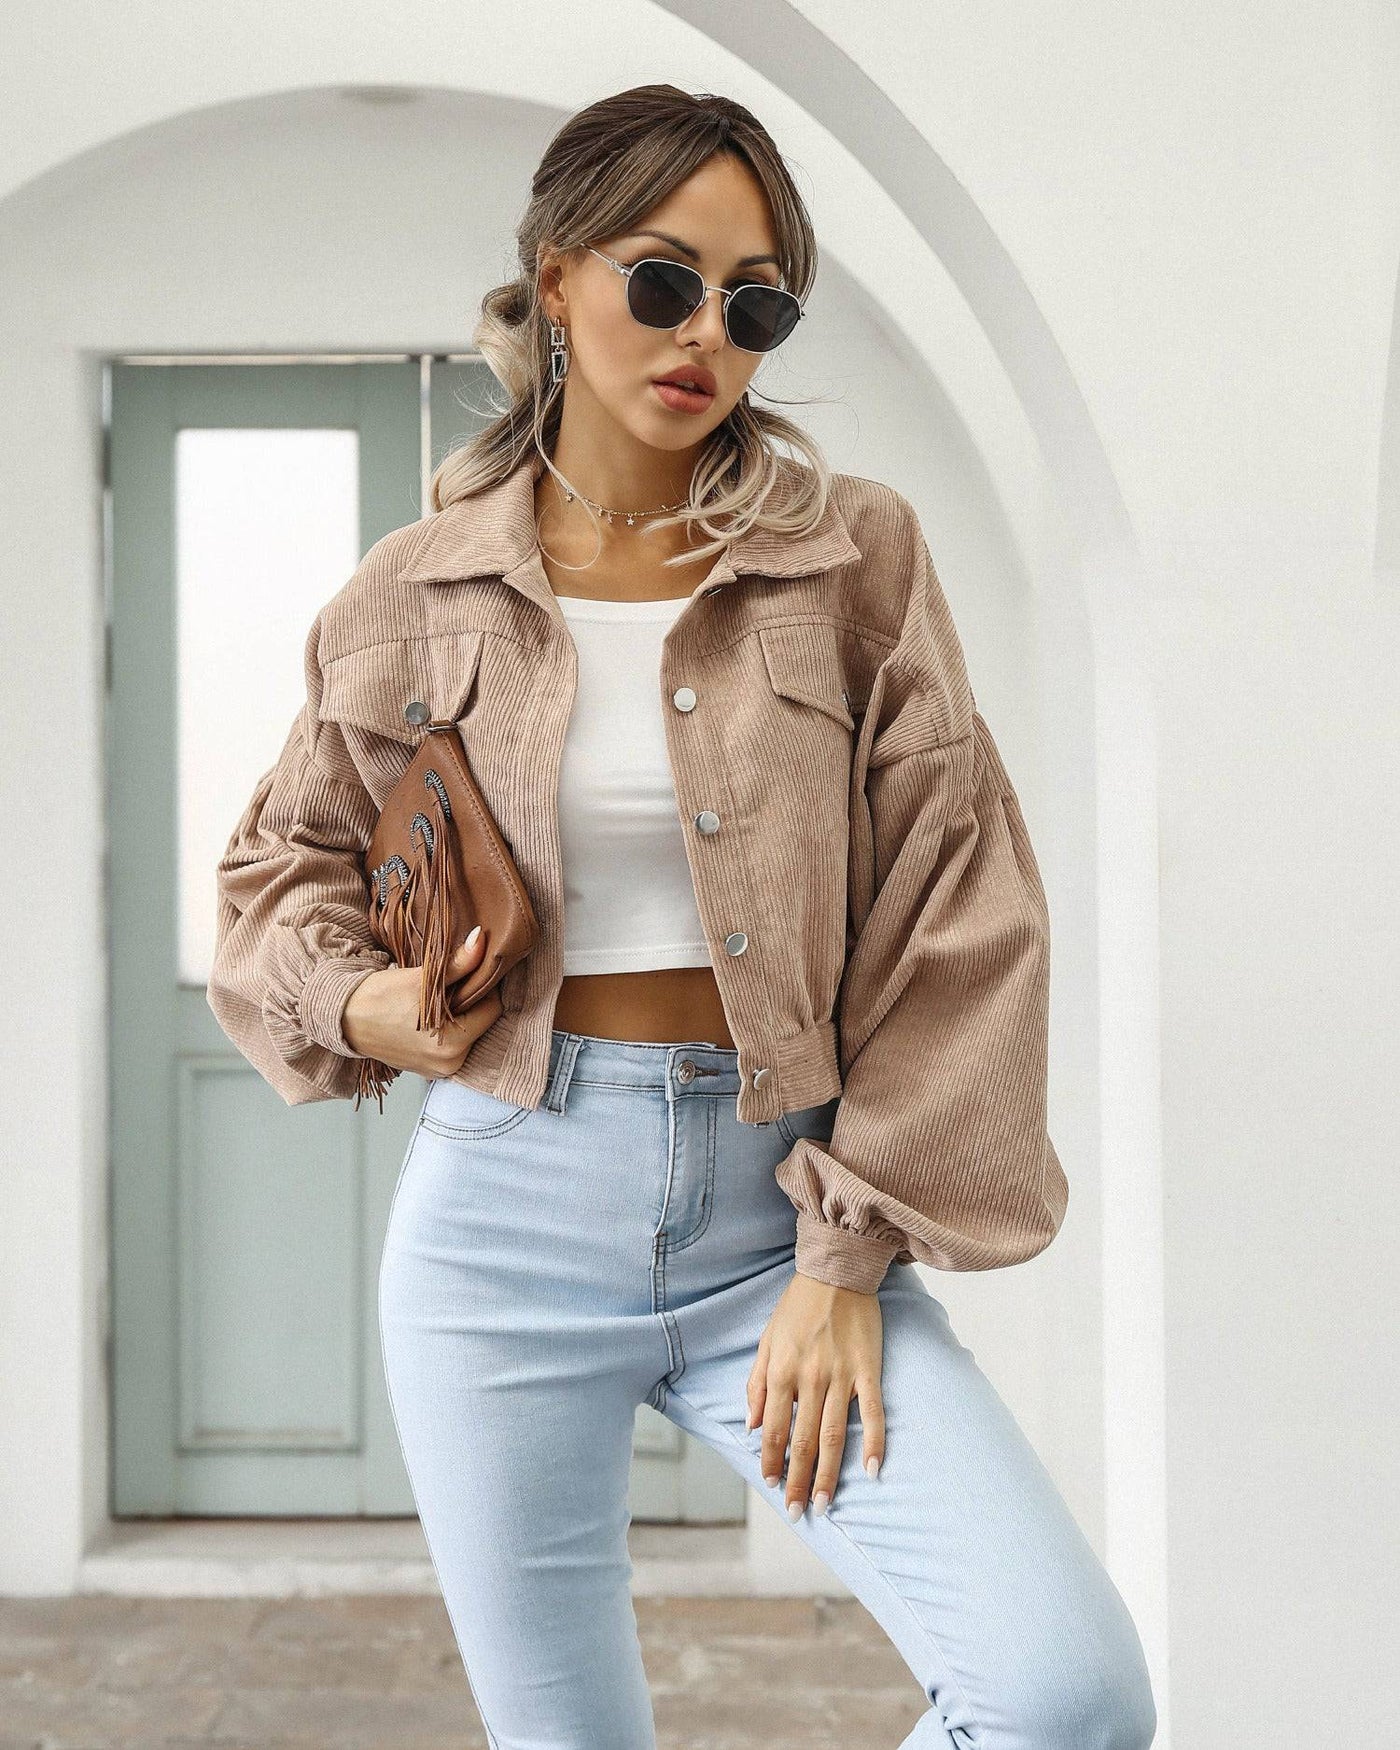 Autumn and winter European and American casual lapel corduroy jacket with lantern sleeves, single breasted short jacket for women - Hot fashionista